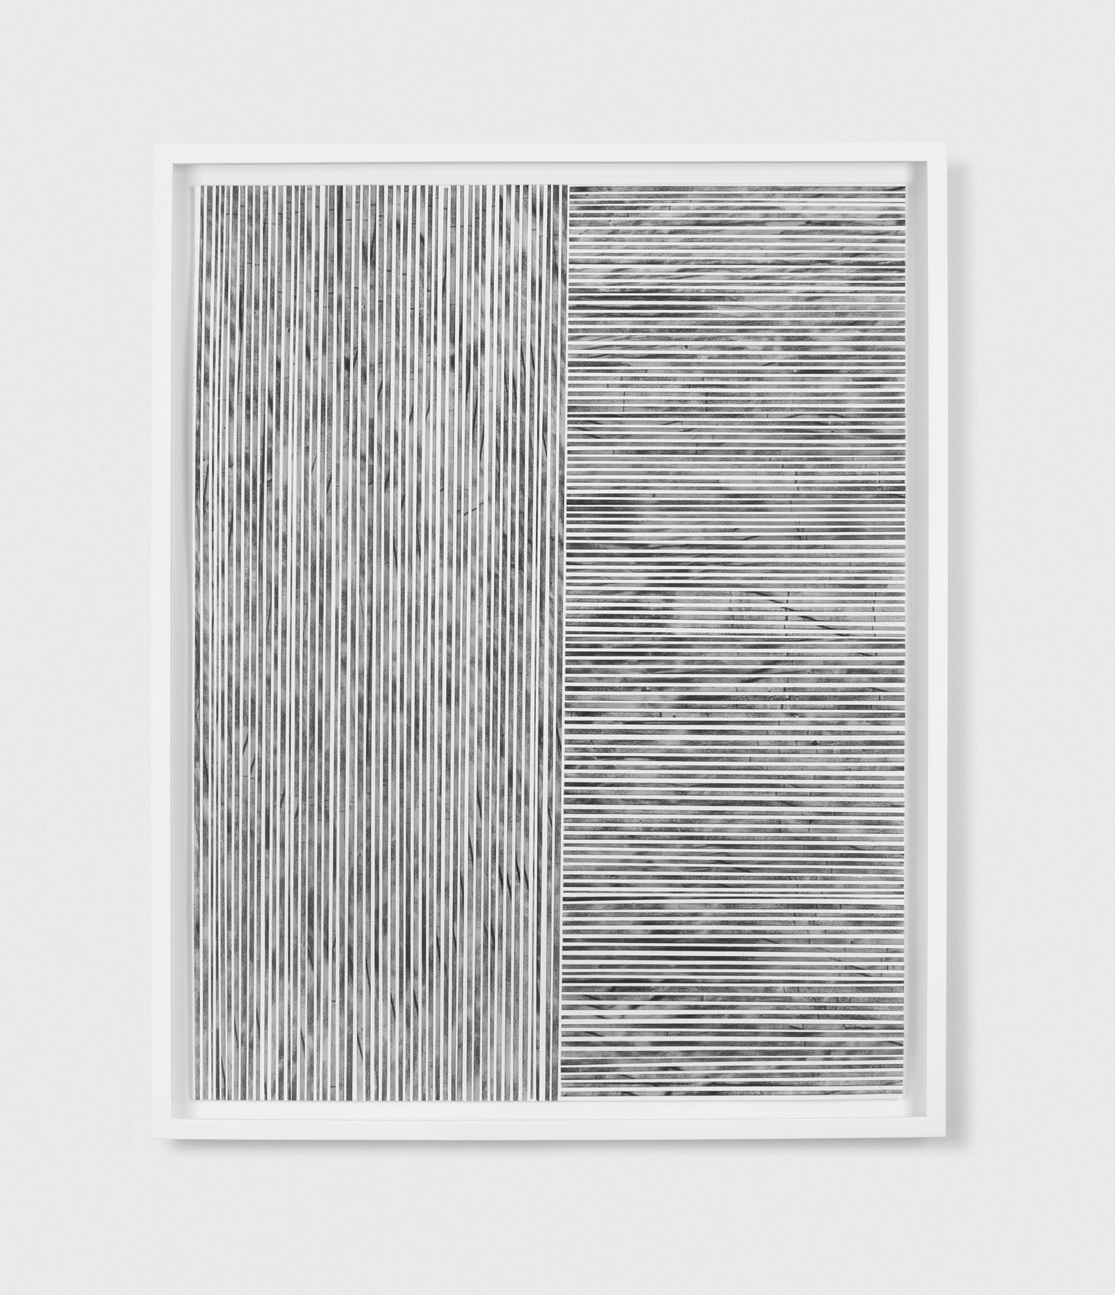   Untitled (the line between #2)  2014, charcoal and powdered graphite on translucent tape, cut and arranged on cotton paper, 22 x 28 inches 